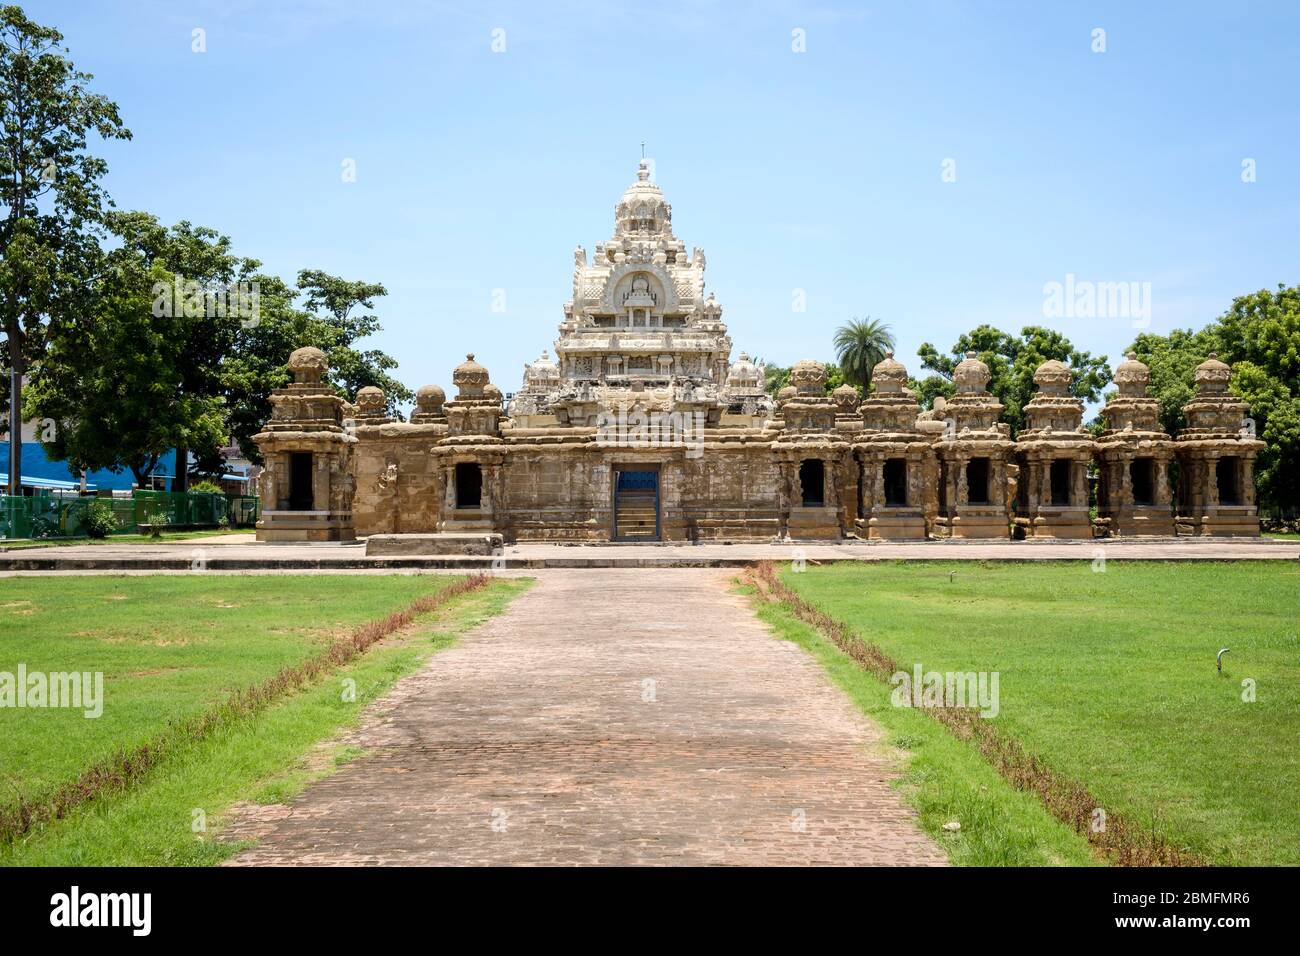 Exterior view of 7th-8th century Kailasanathar, a Pallava (Dravidian) style Hindu temple, the oldest structure in Kanchipuram, Tamil Nadu, India. Stock Photo